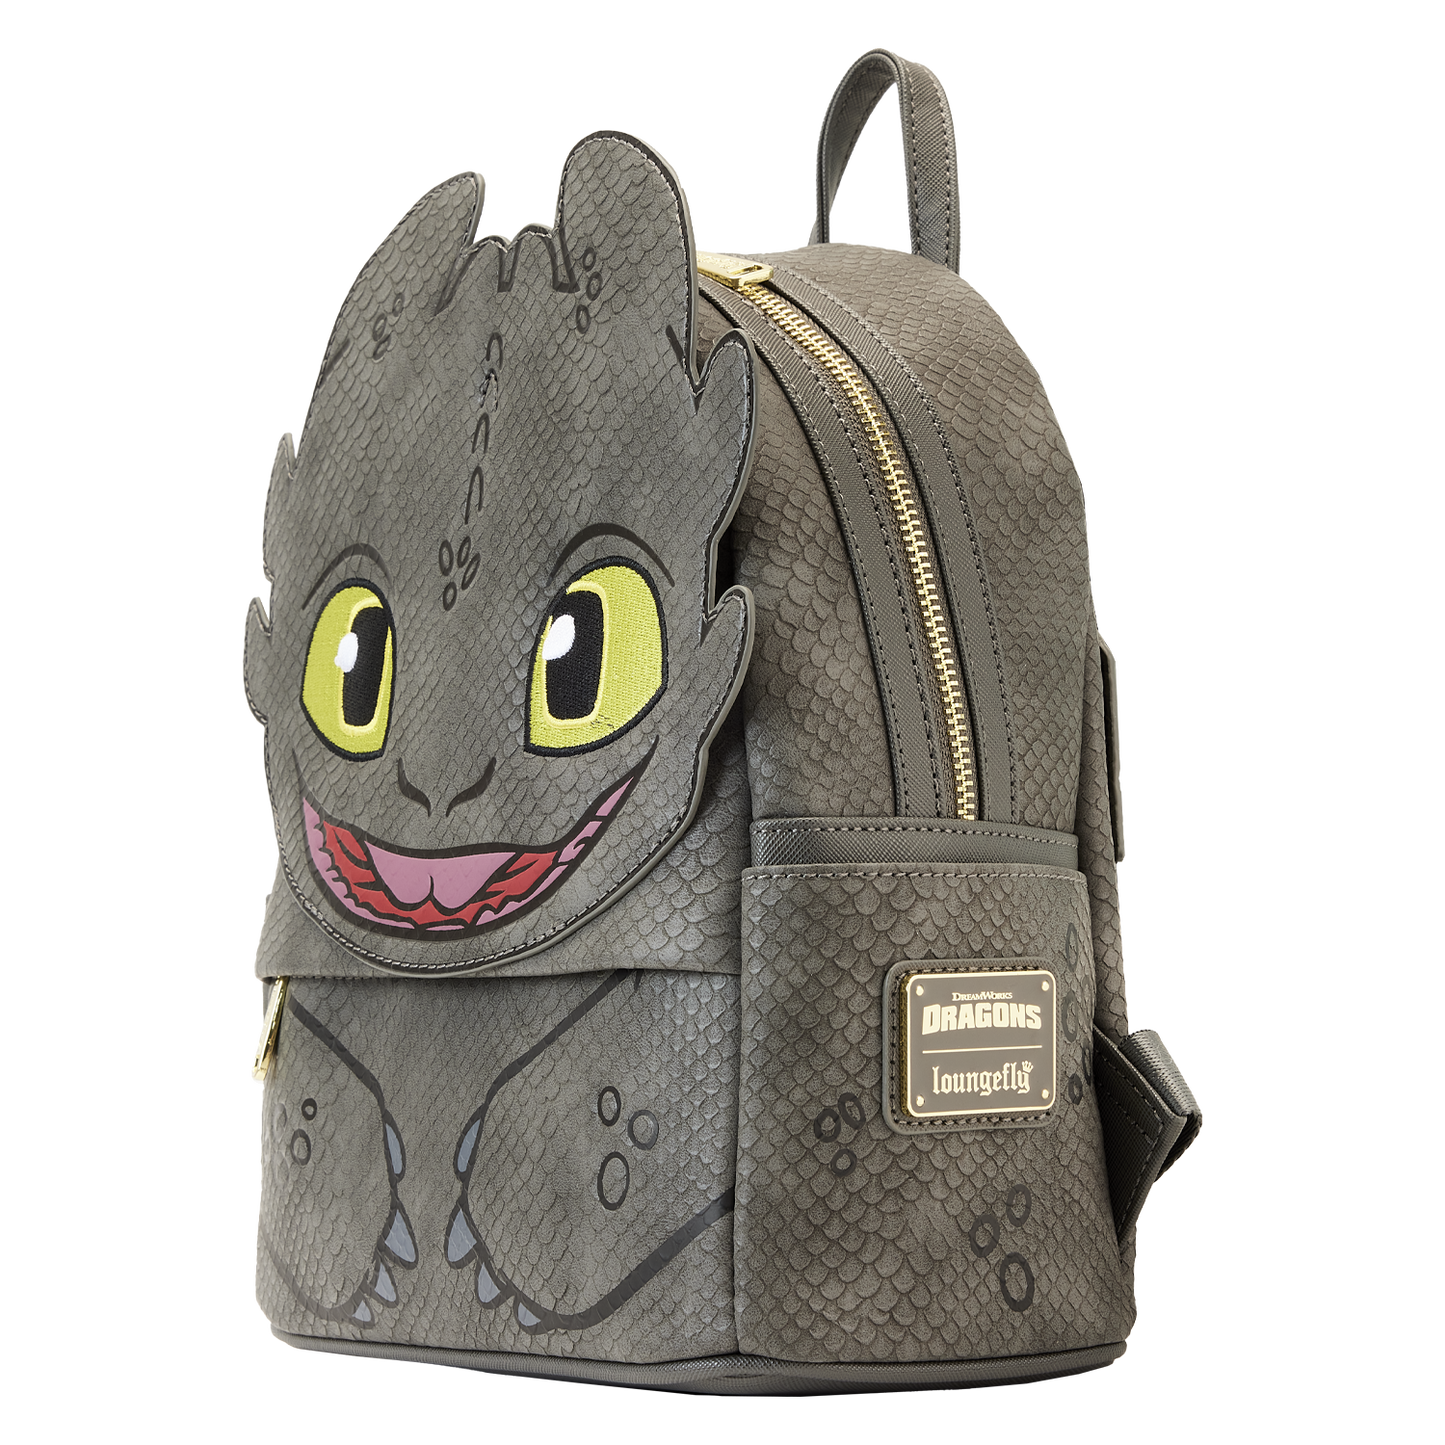 Dreamworks How To Train Your Dragon Toothless Cosplay Mini Backpack